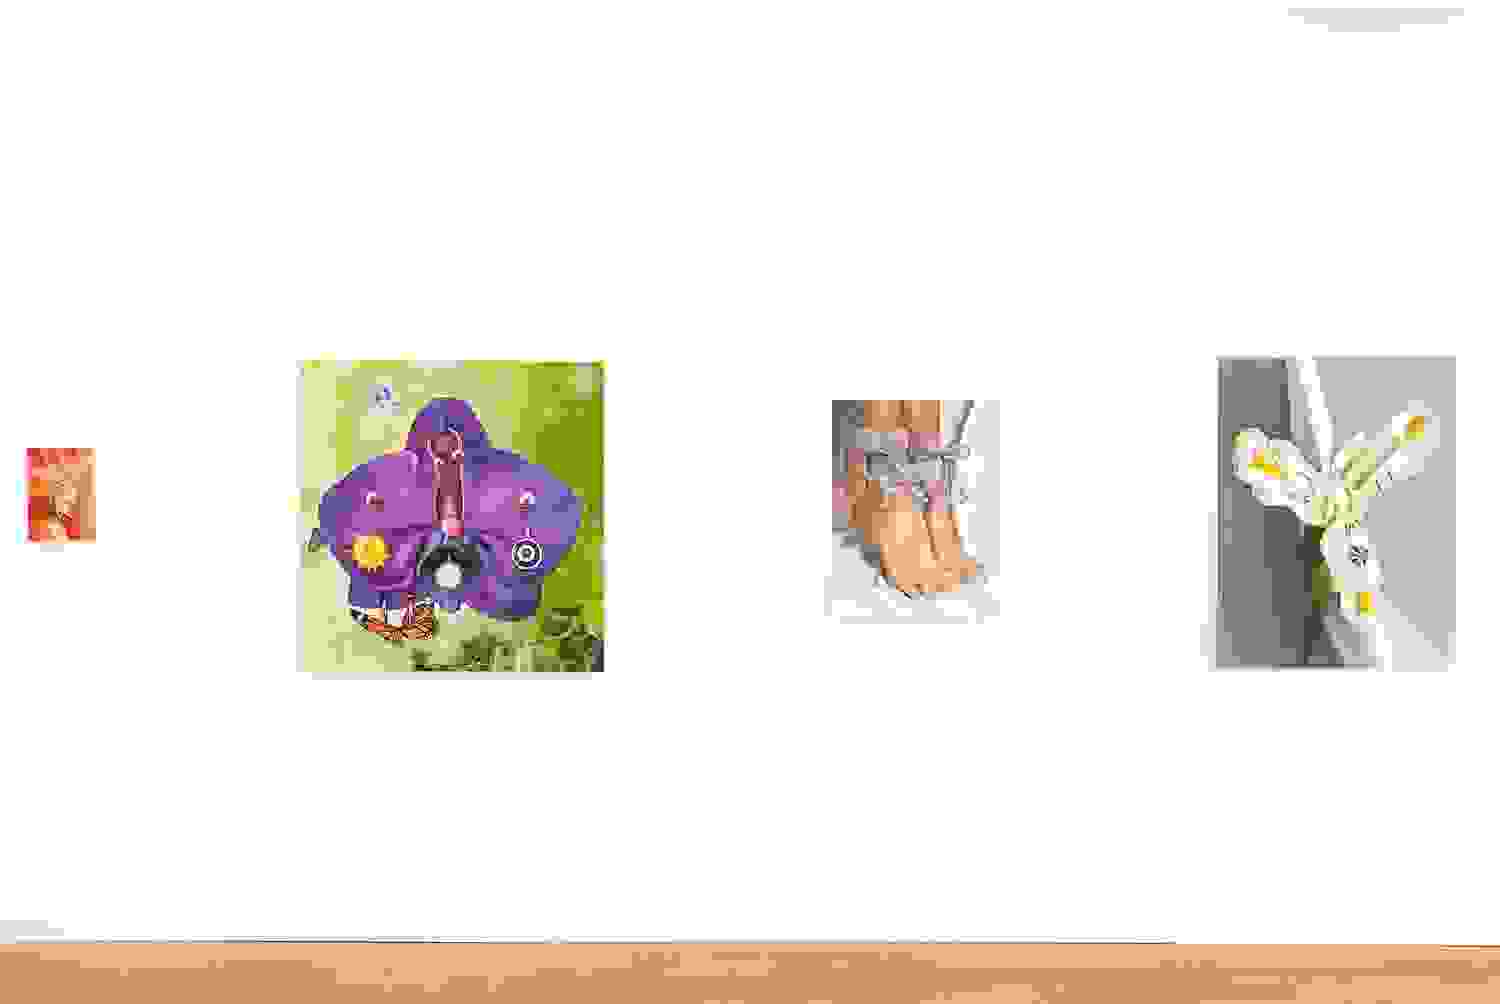 A wall of 4 paintings. Left to right: a small painting of a flower, a larger painting of a purple flower pierced with jewelry, a painting of feet, and a painting of another flower that has been pierced.  